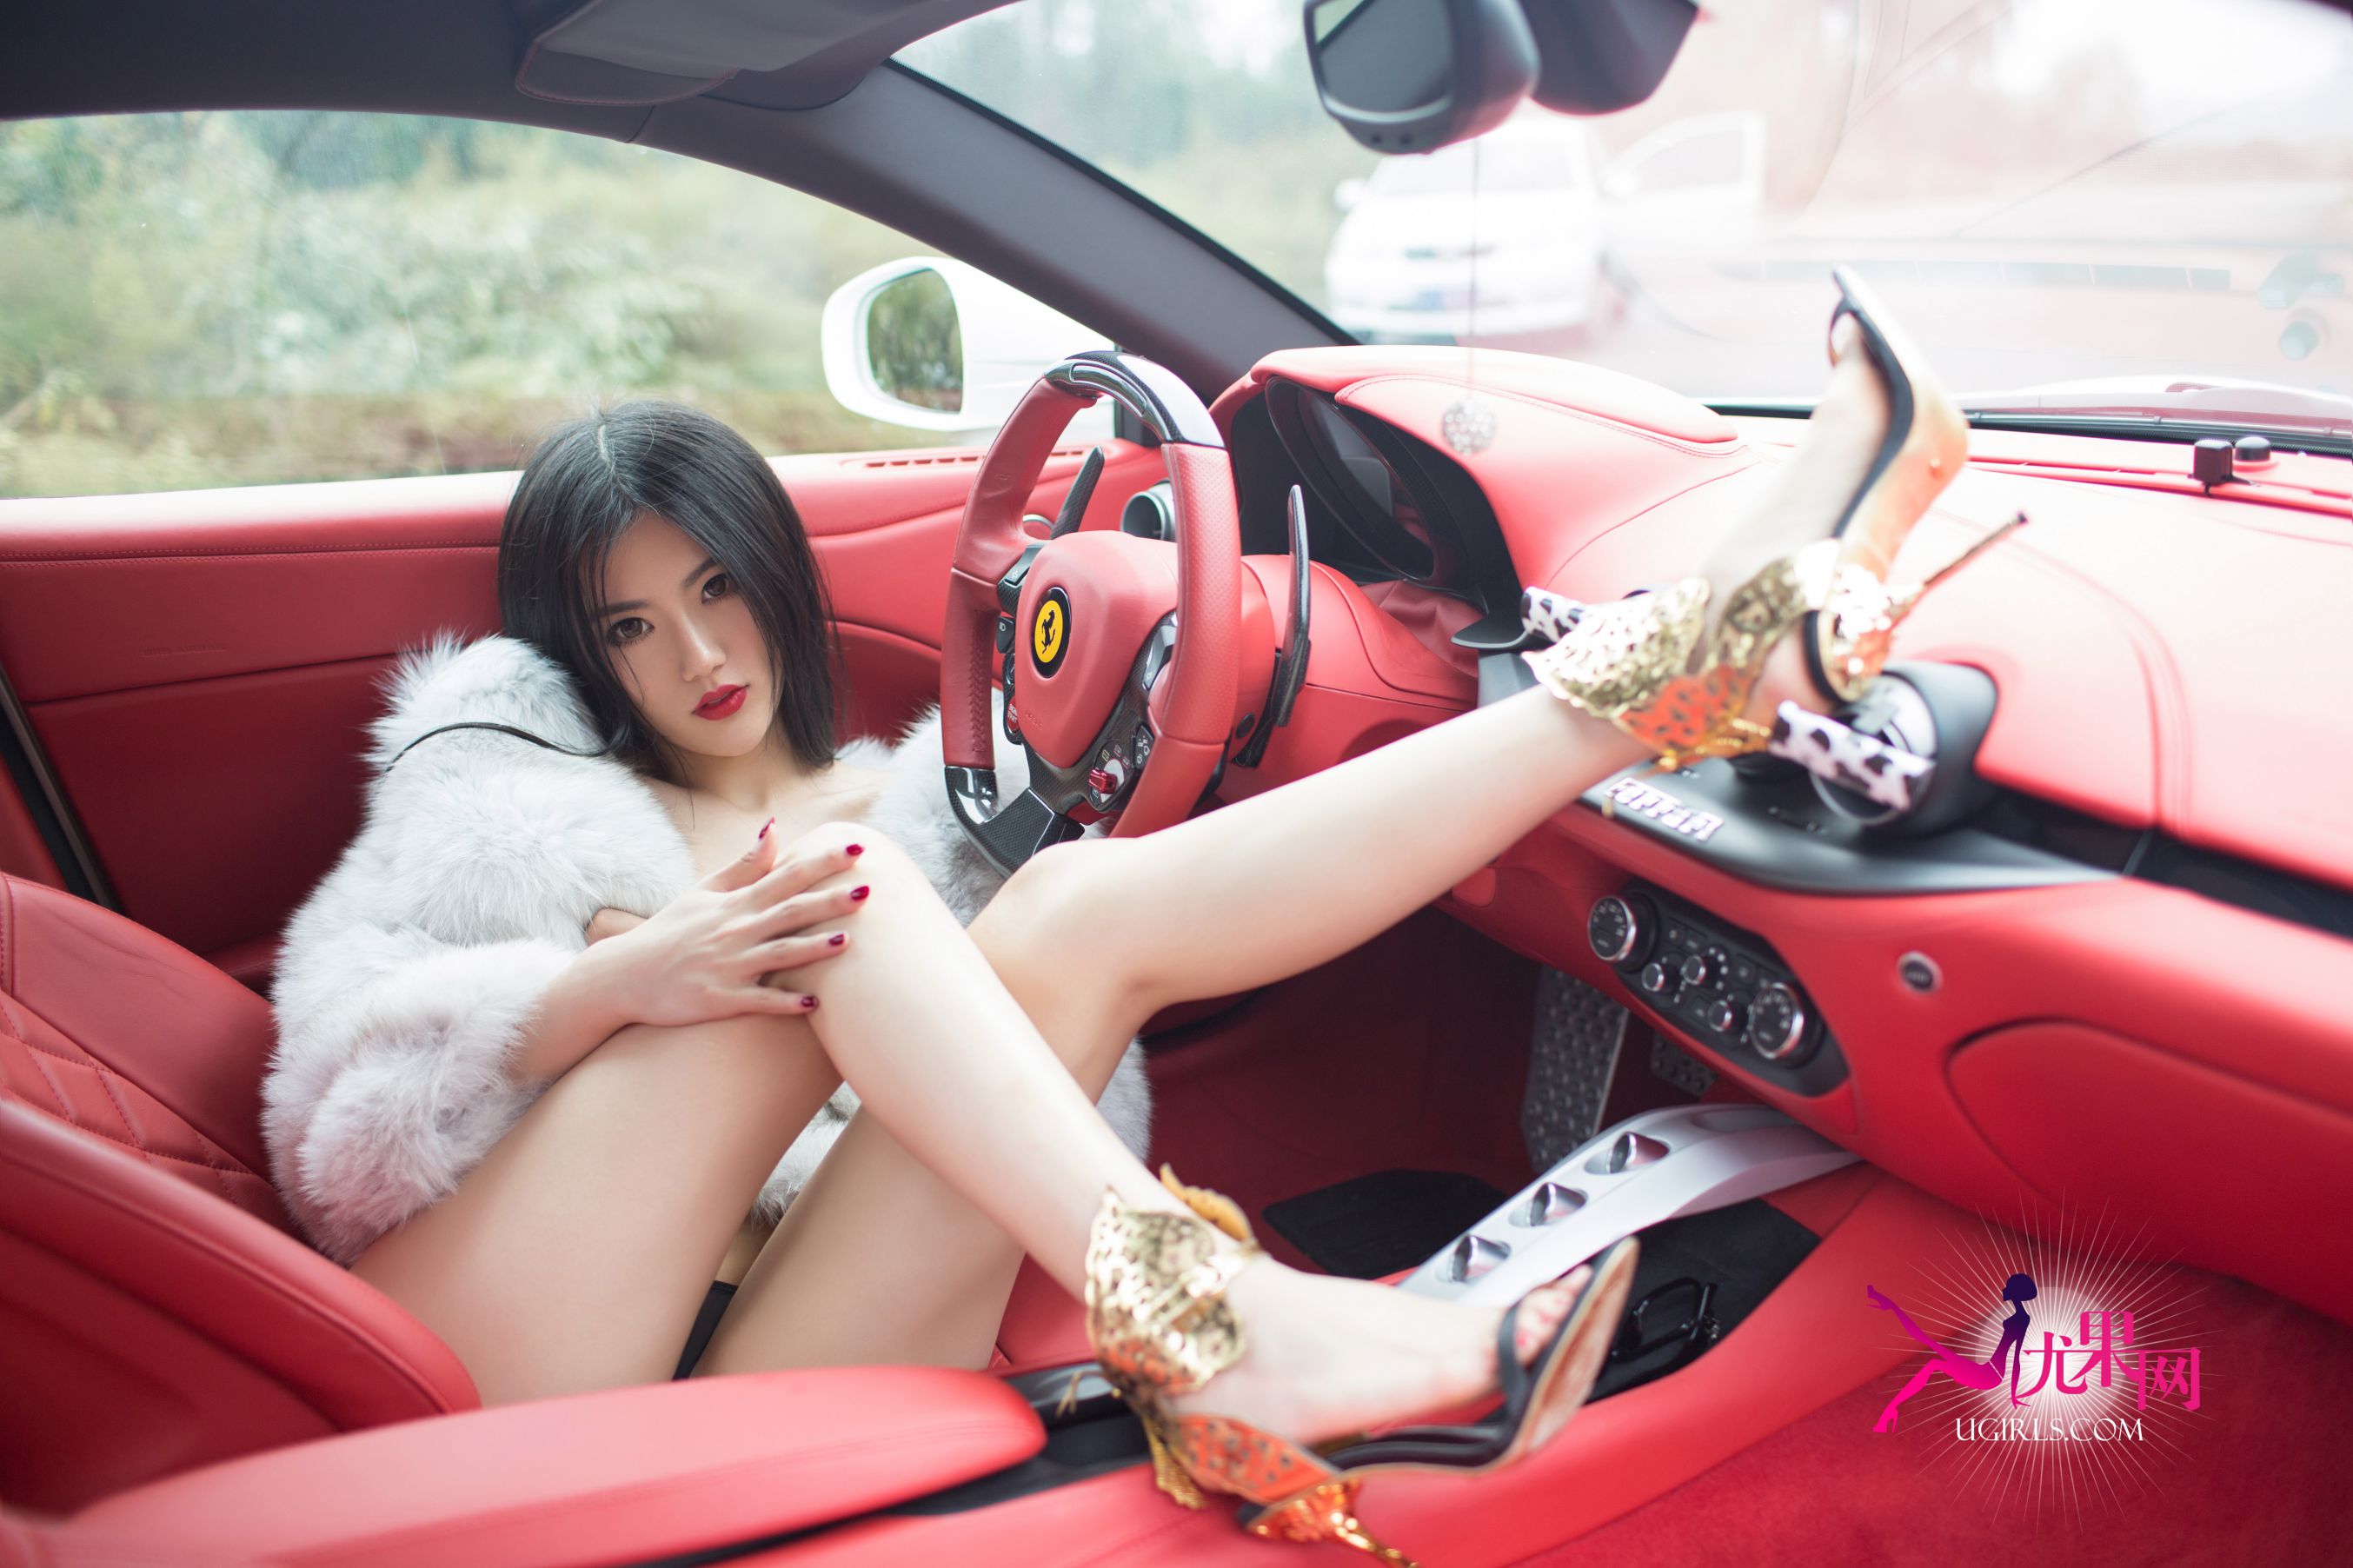 Erotic Journey By Train, Supercar And Luxury Hotel In China